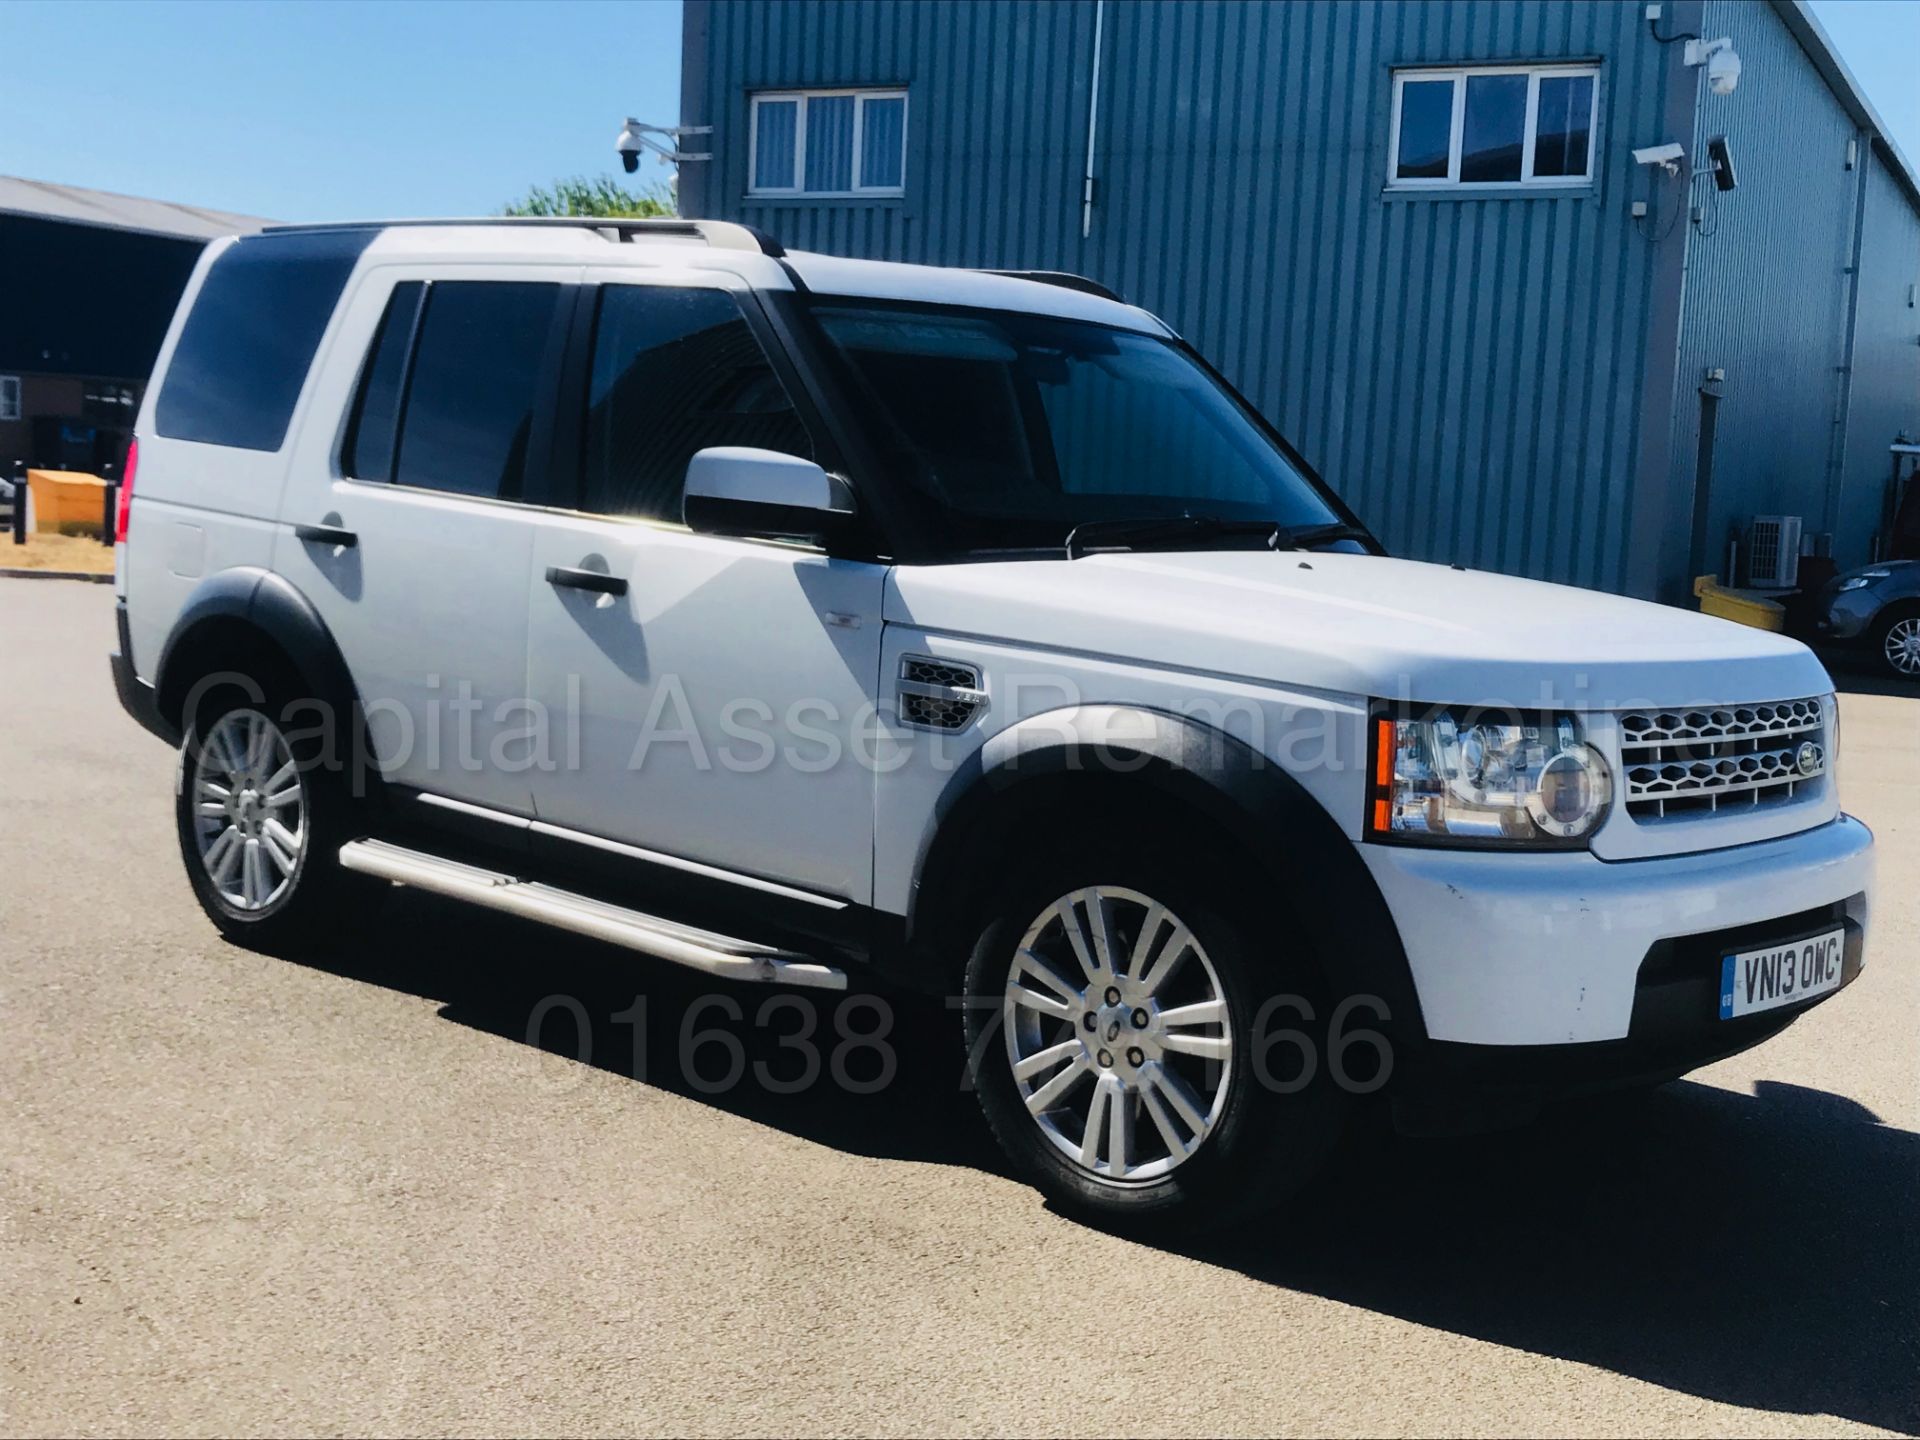 (On Sale) LAND ROVER DISCOVERY 4 **COMMERCIAL VAN**(2013 - 13 REG) '3.0 TDV6 - 210 BHP - AUTO'